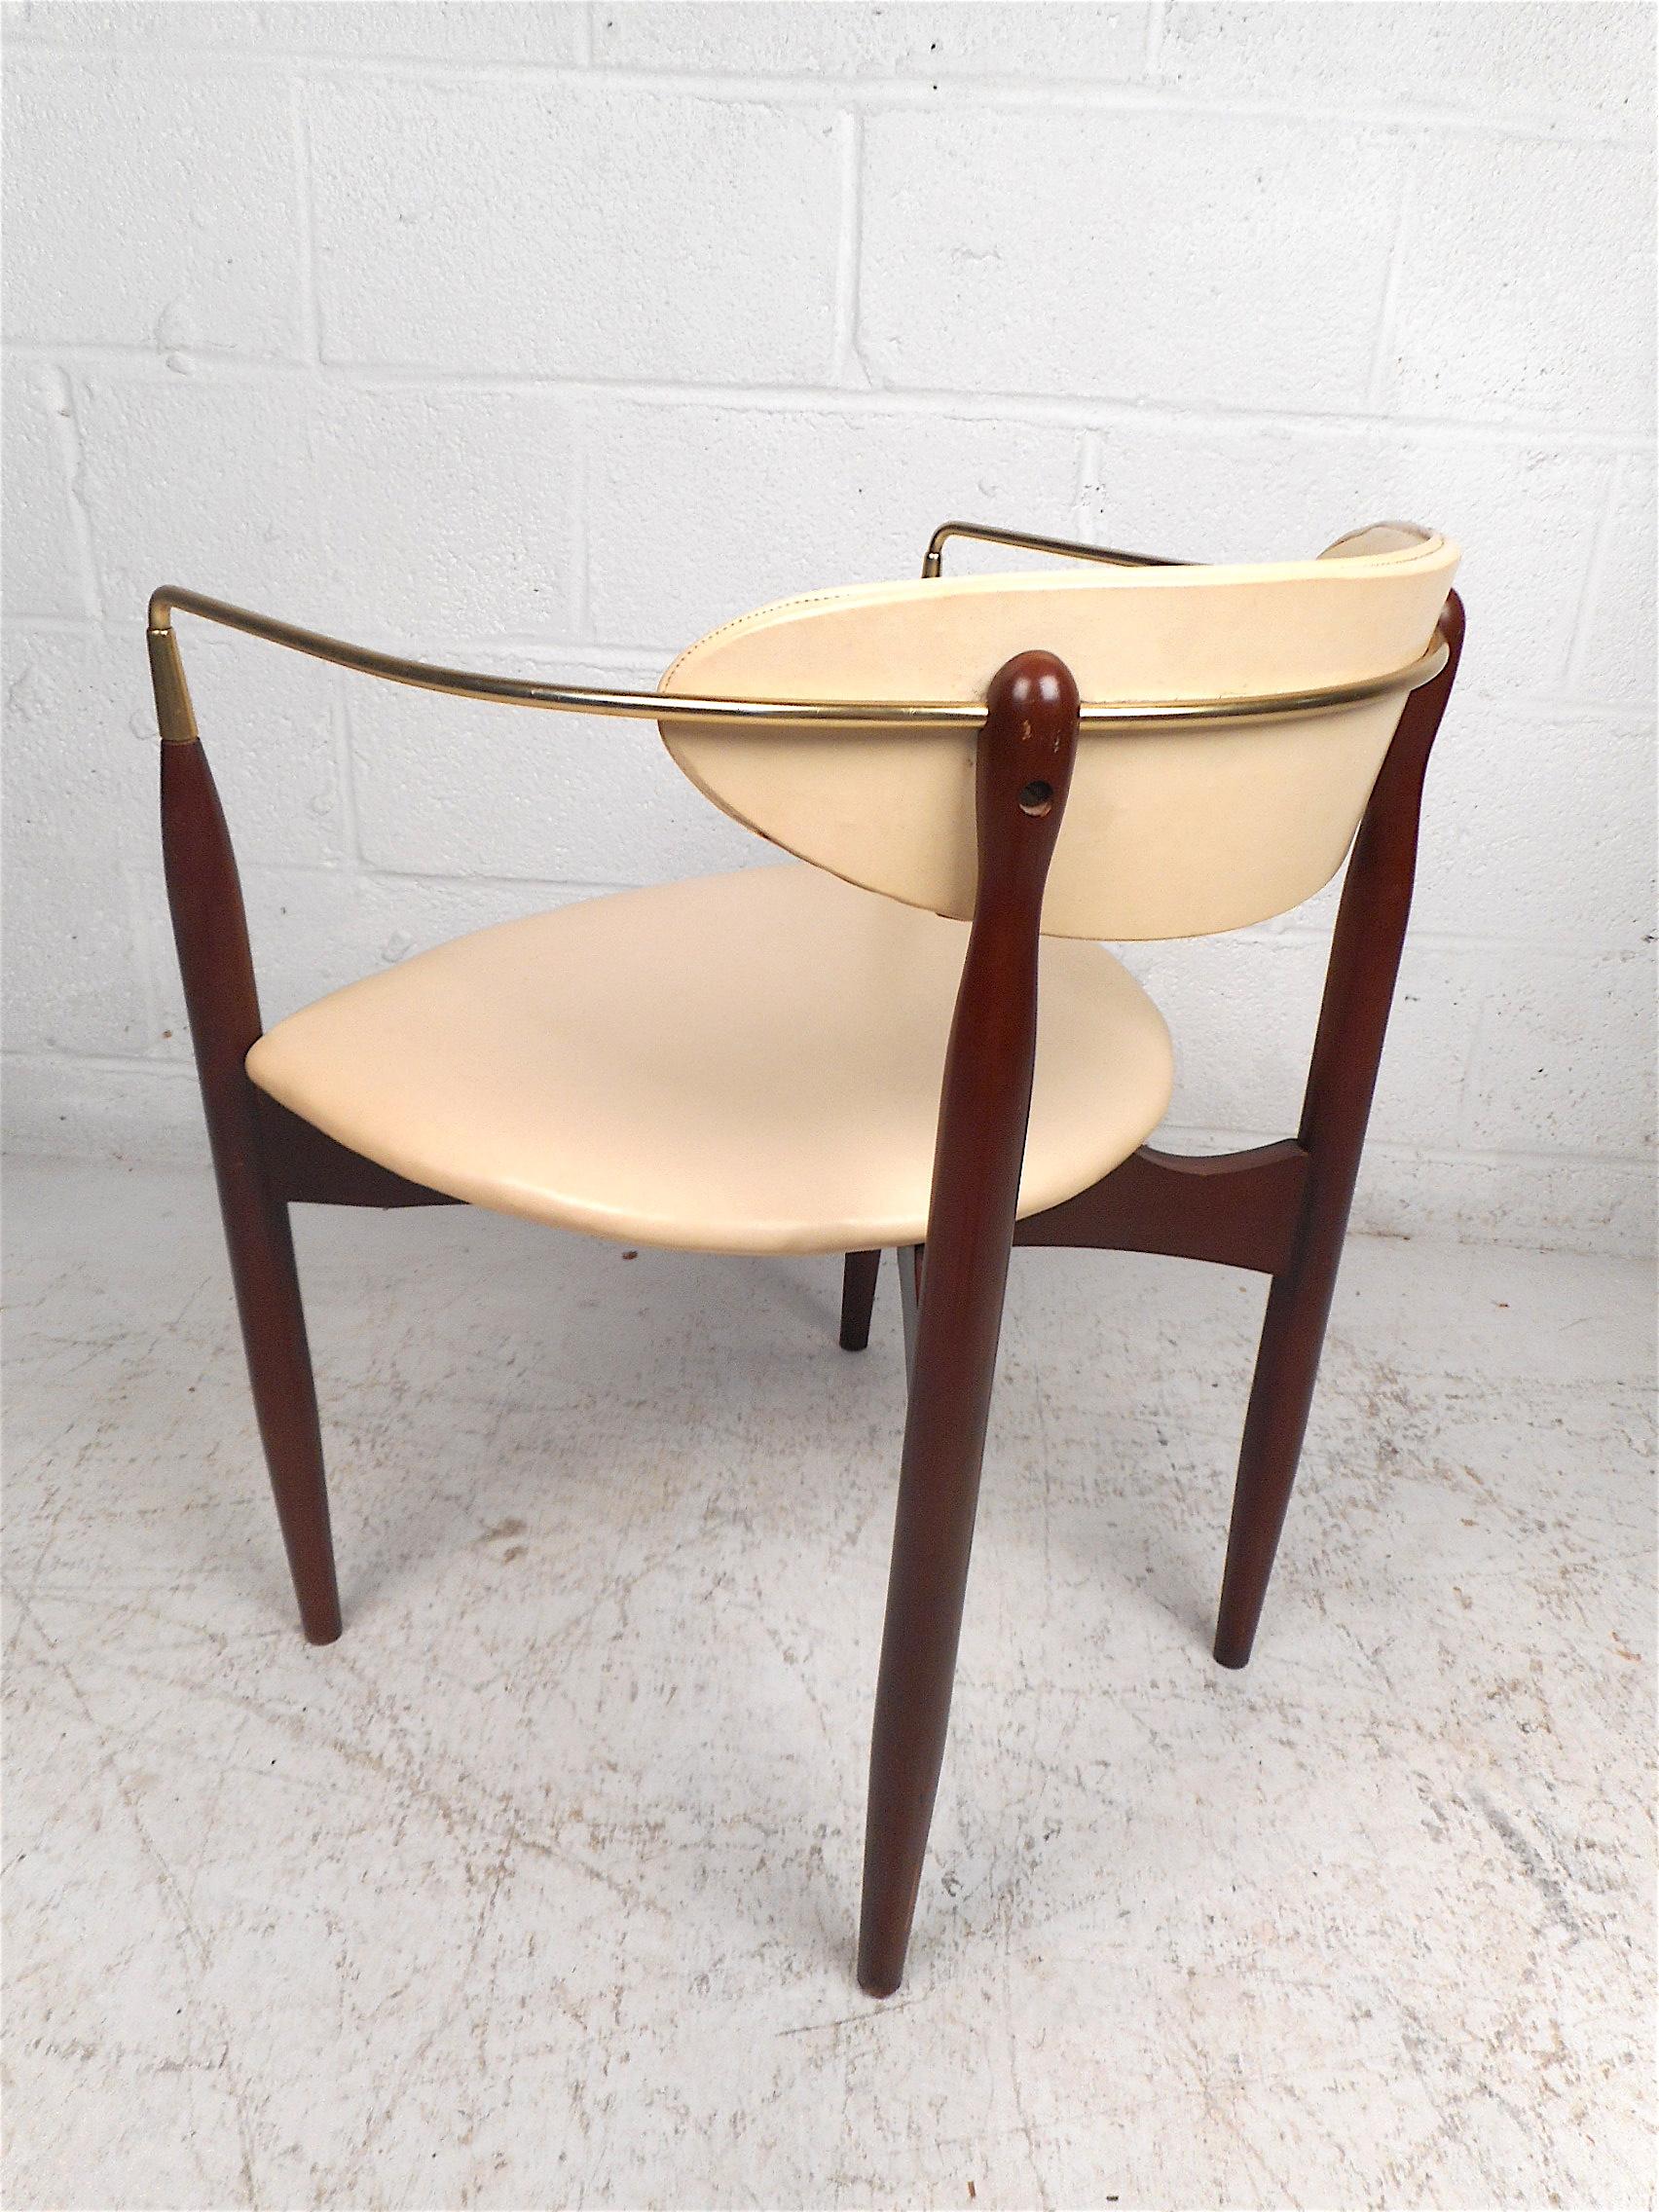 20th Century Mid-Century Modern Chair by Kedawood Furniture